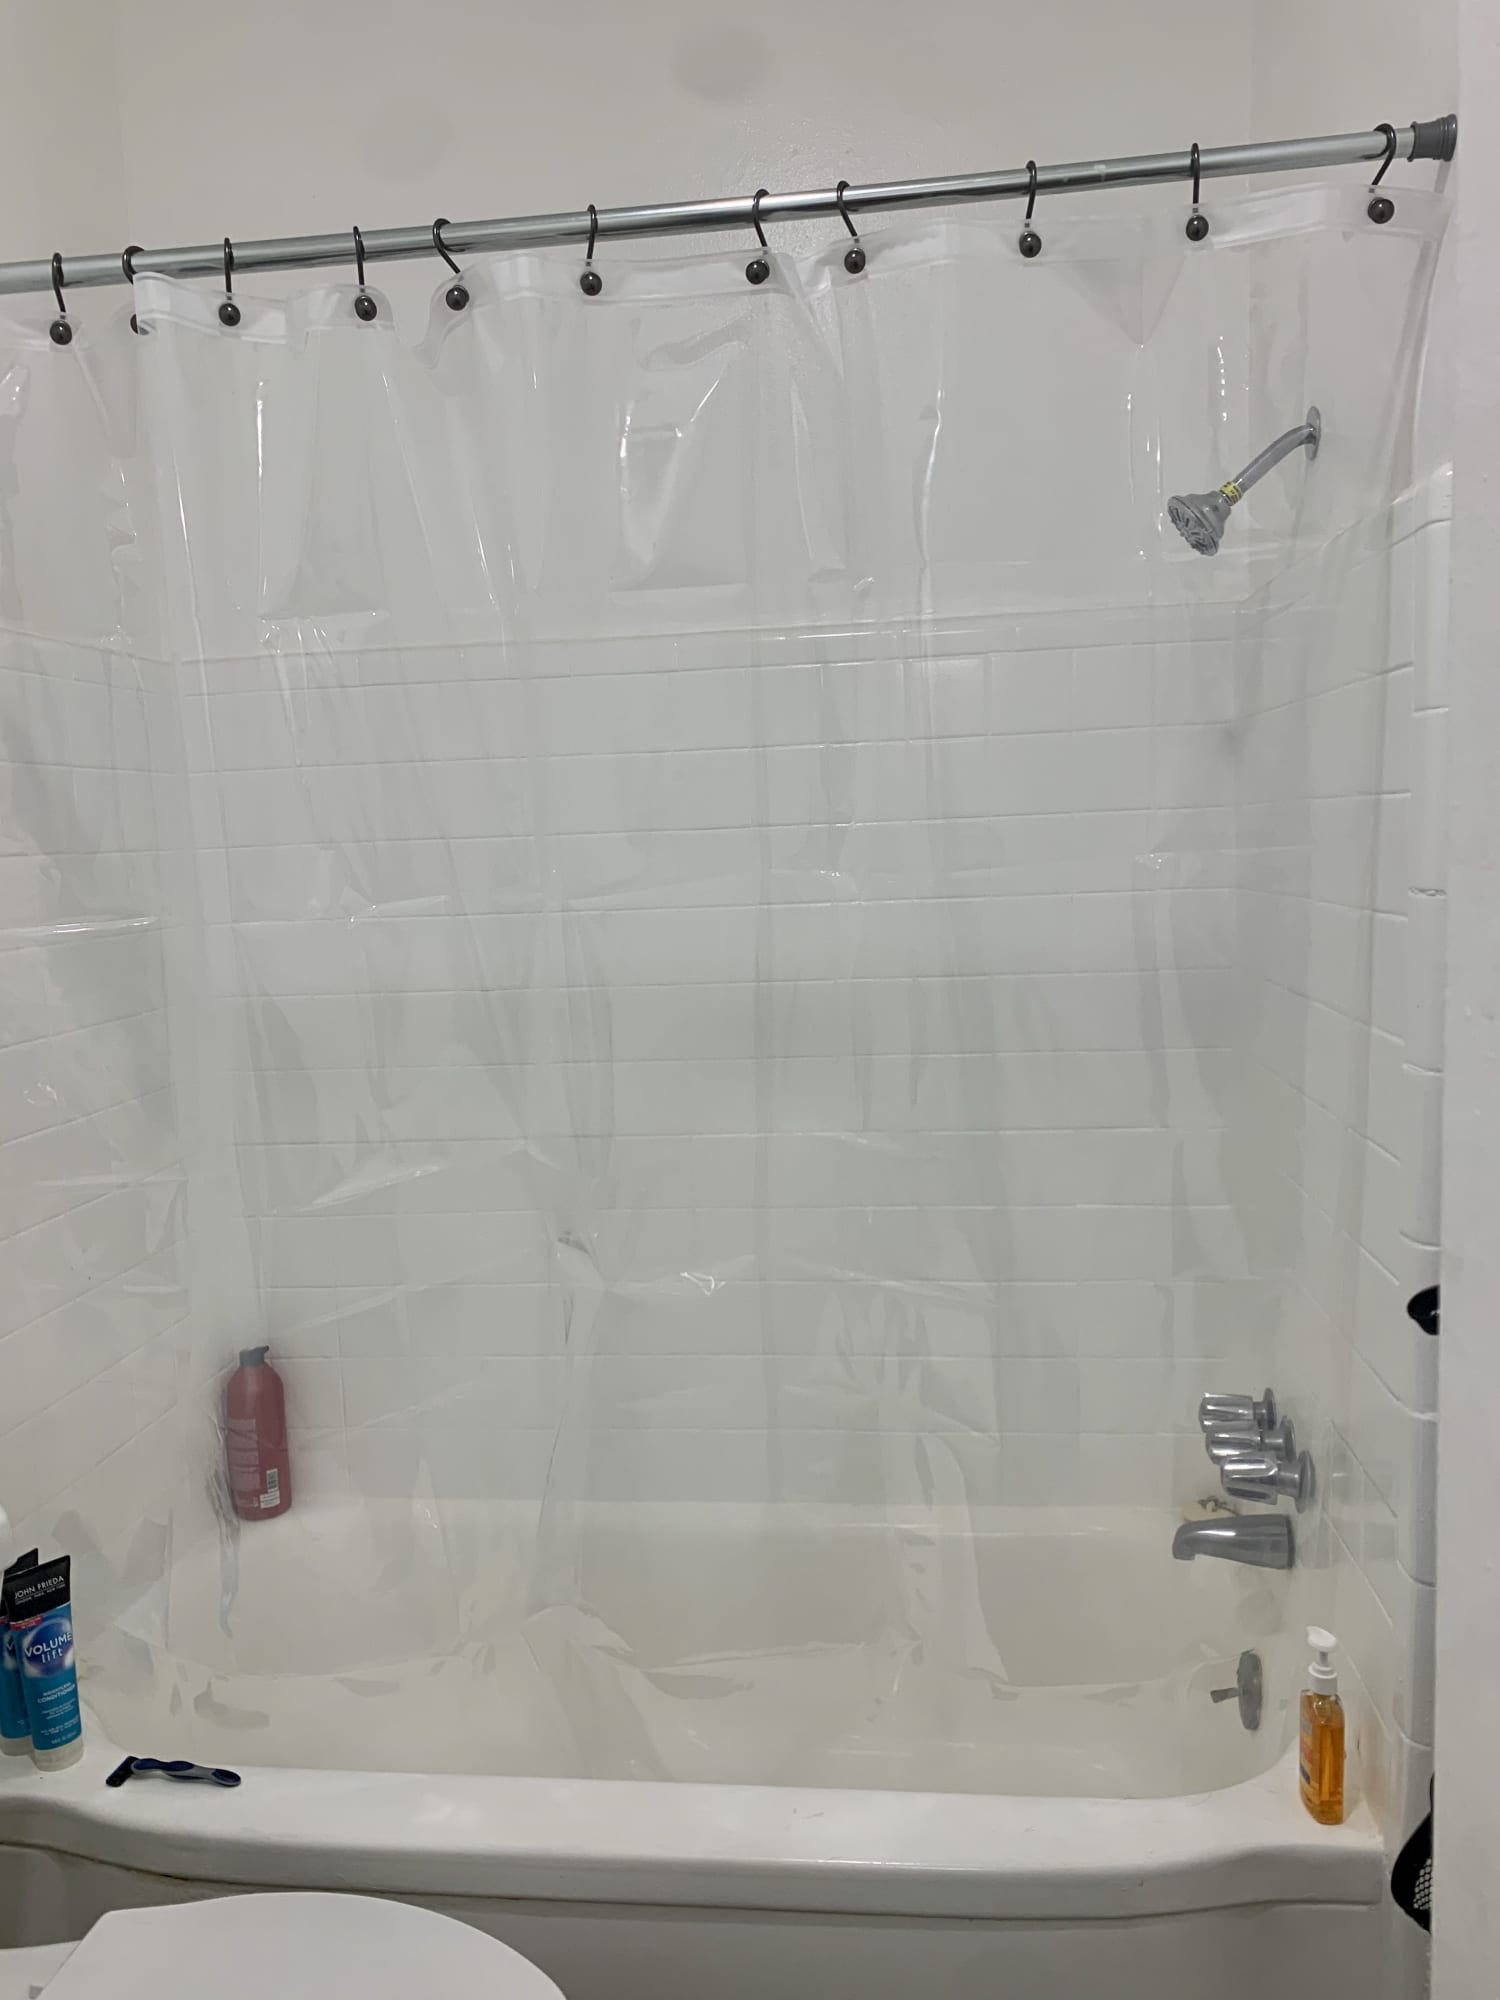 This Is The Best Shower Curtain Liner, Do All Shower Curtains Need Liners